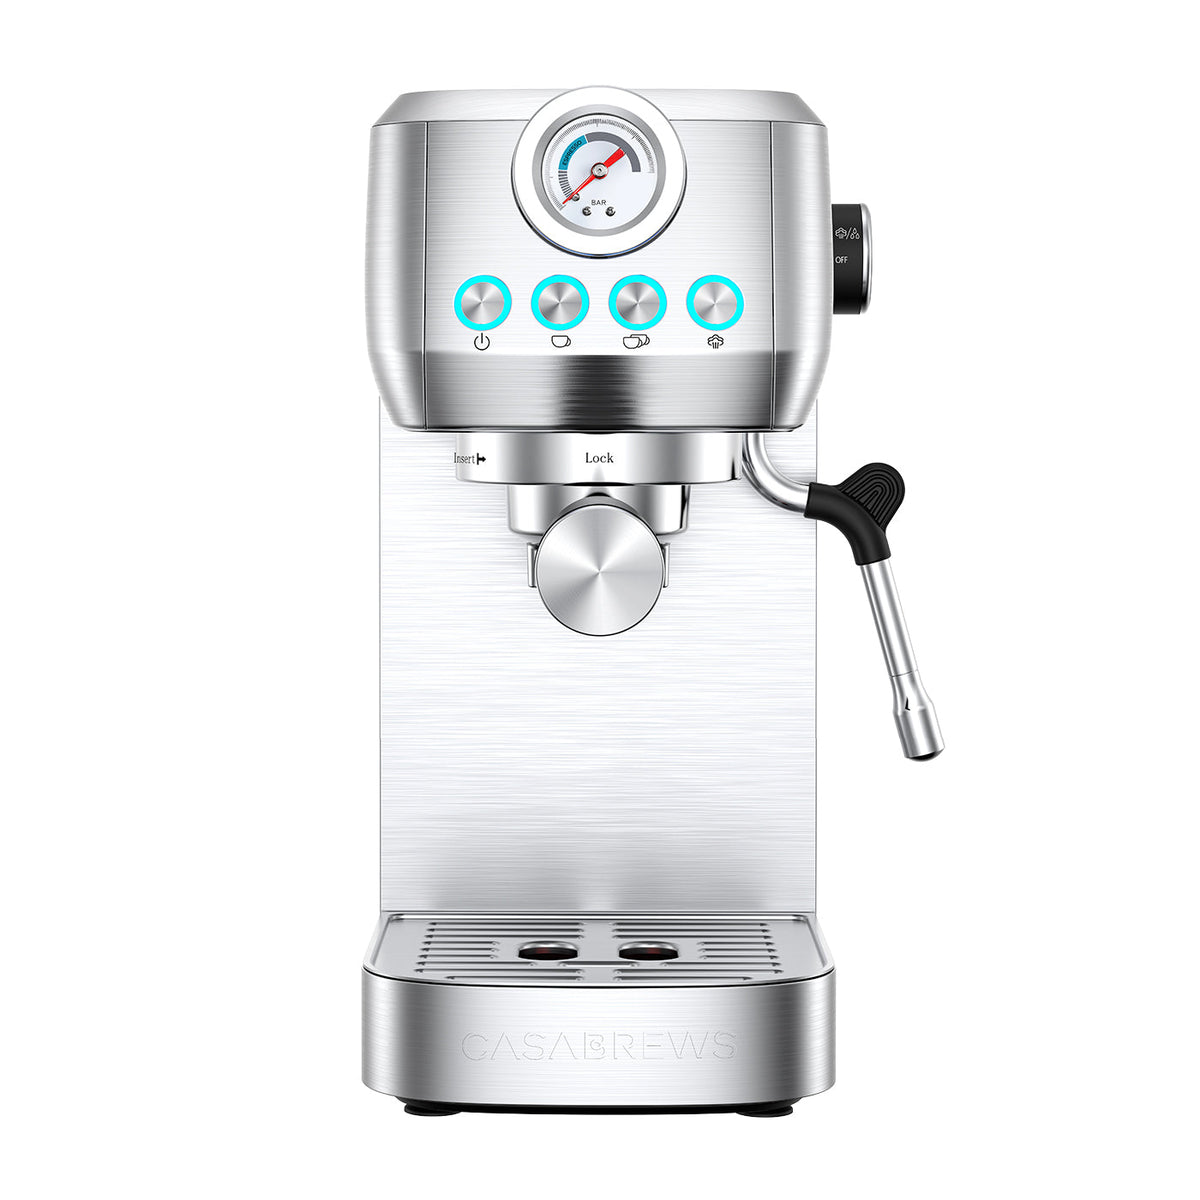 CM5418™ Espresso Machine, How to set the volume of 1 cup and 2 cup